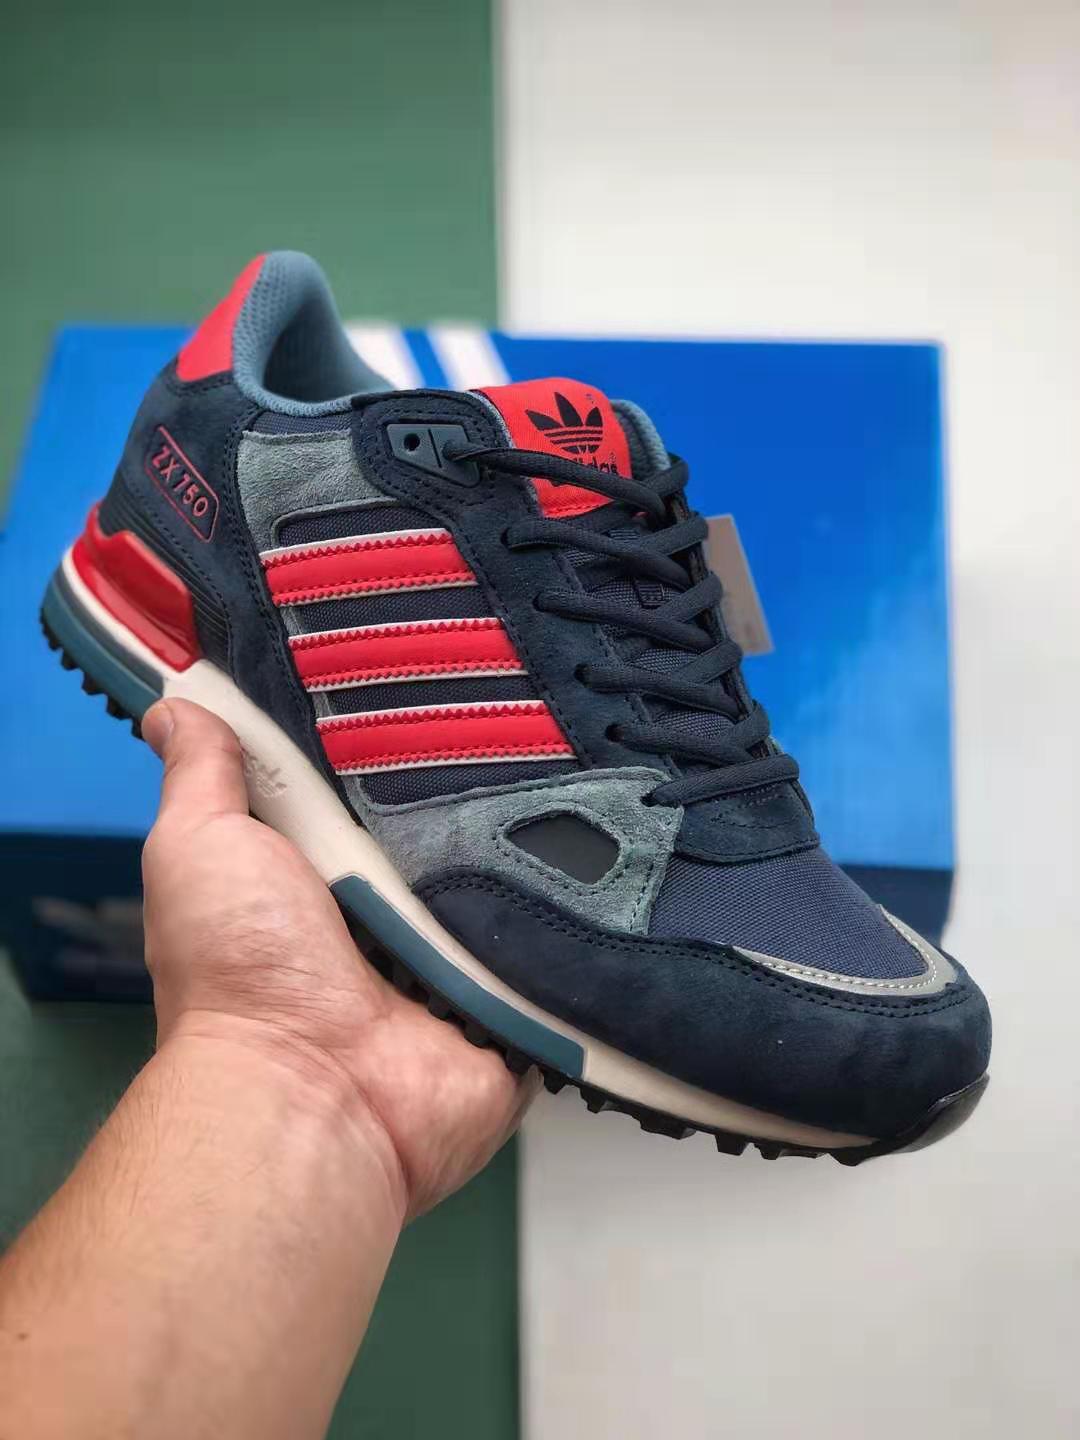 Adidas ZX 750 Navy Black Red M18260 - Stylish Sneakers for Sporty Looks